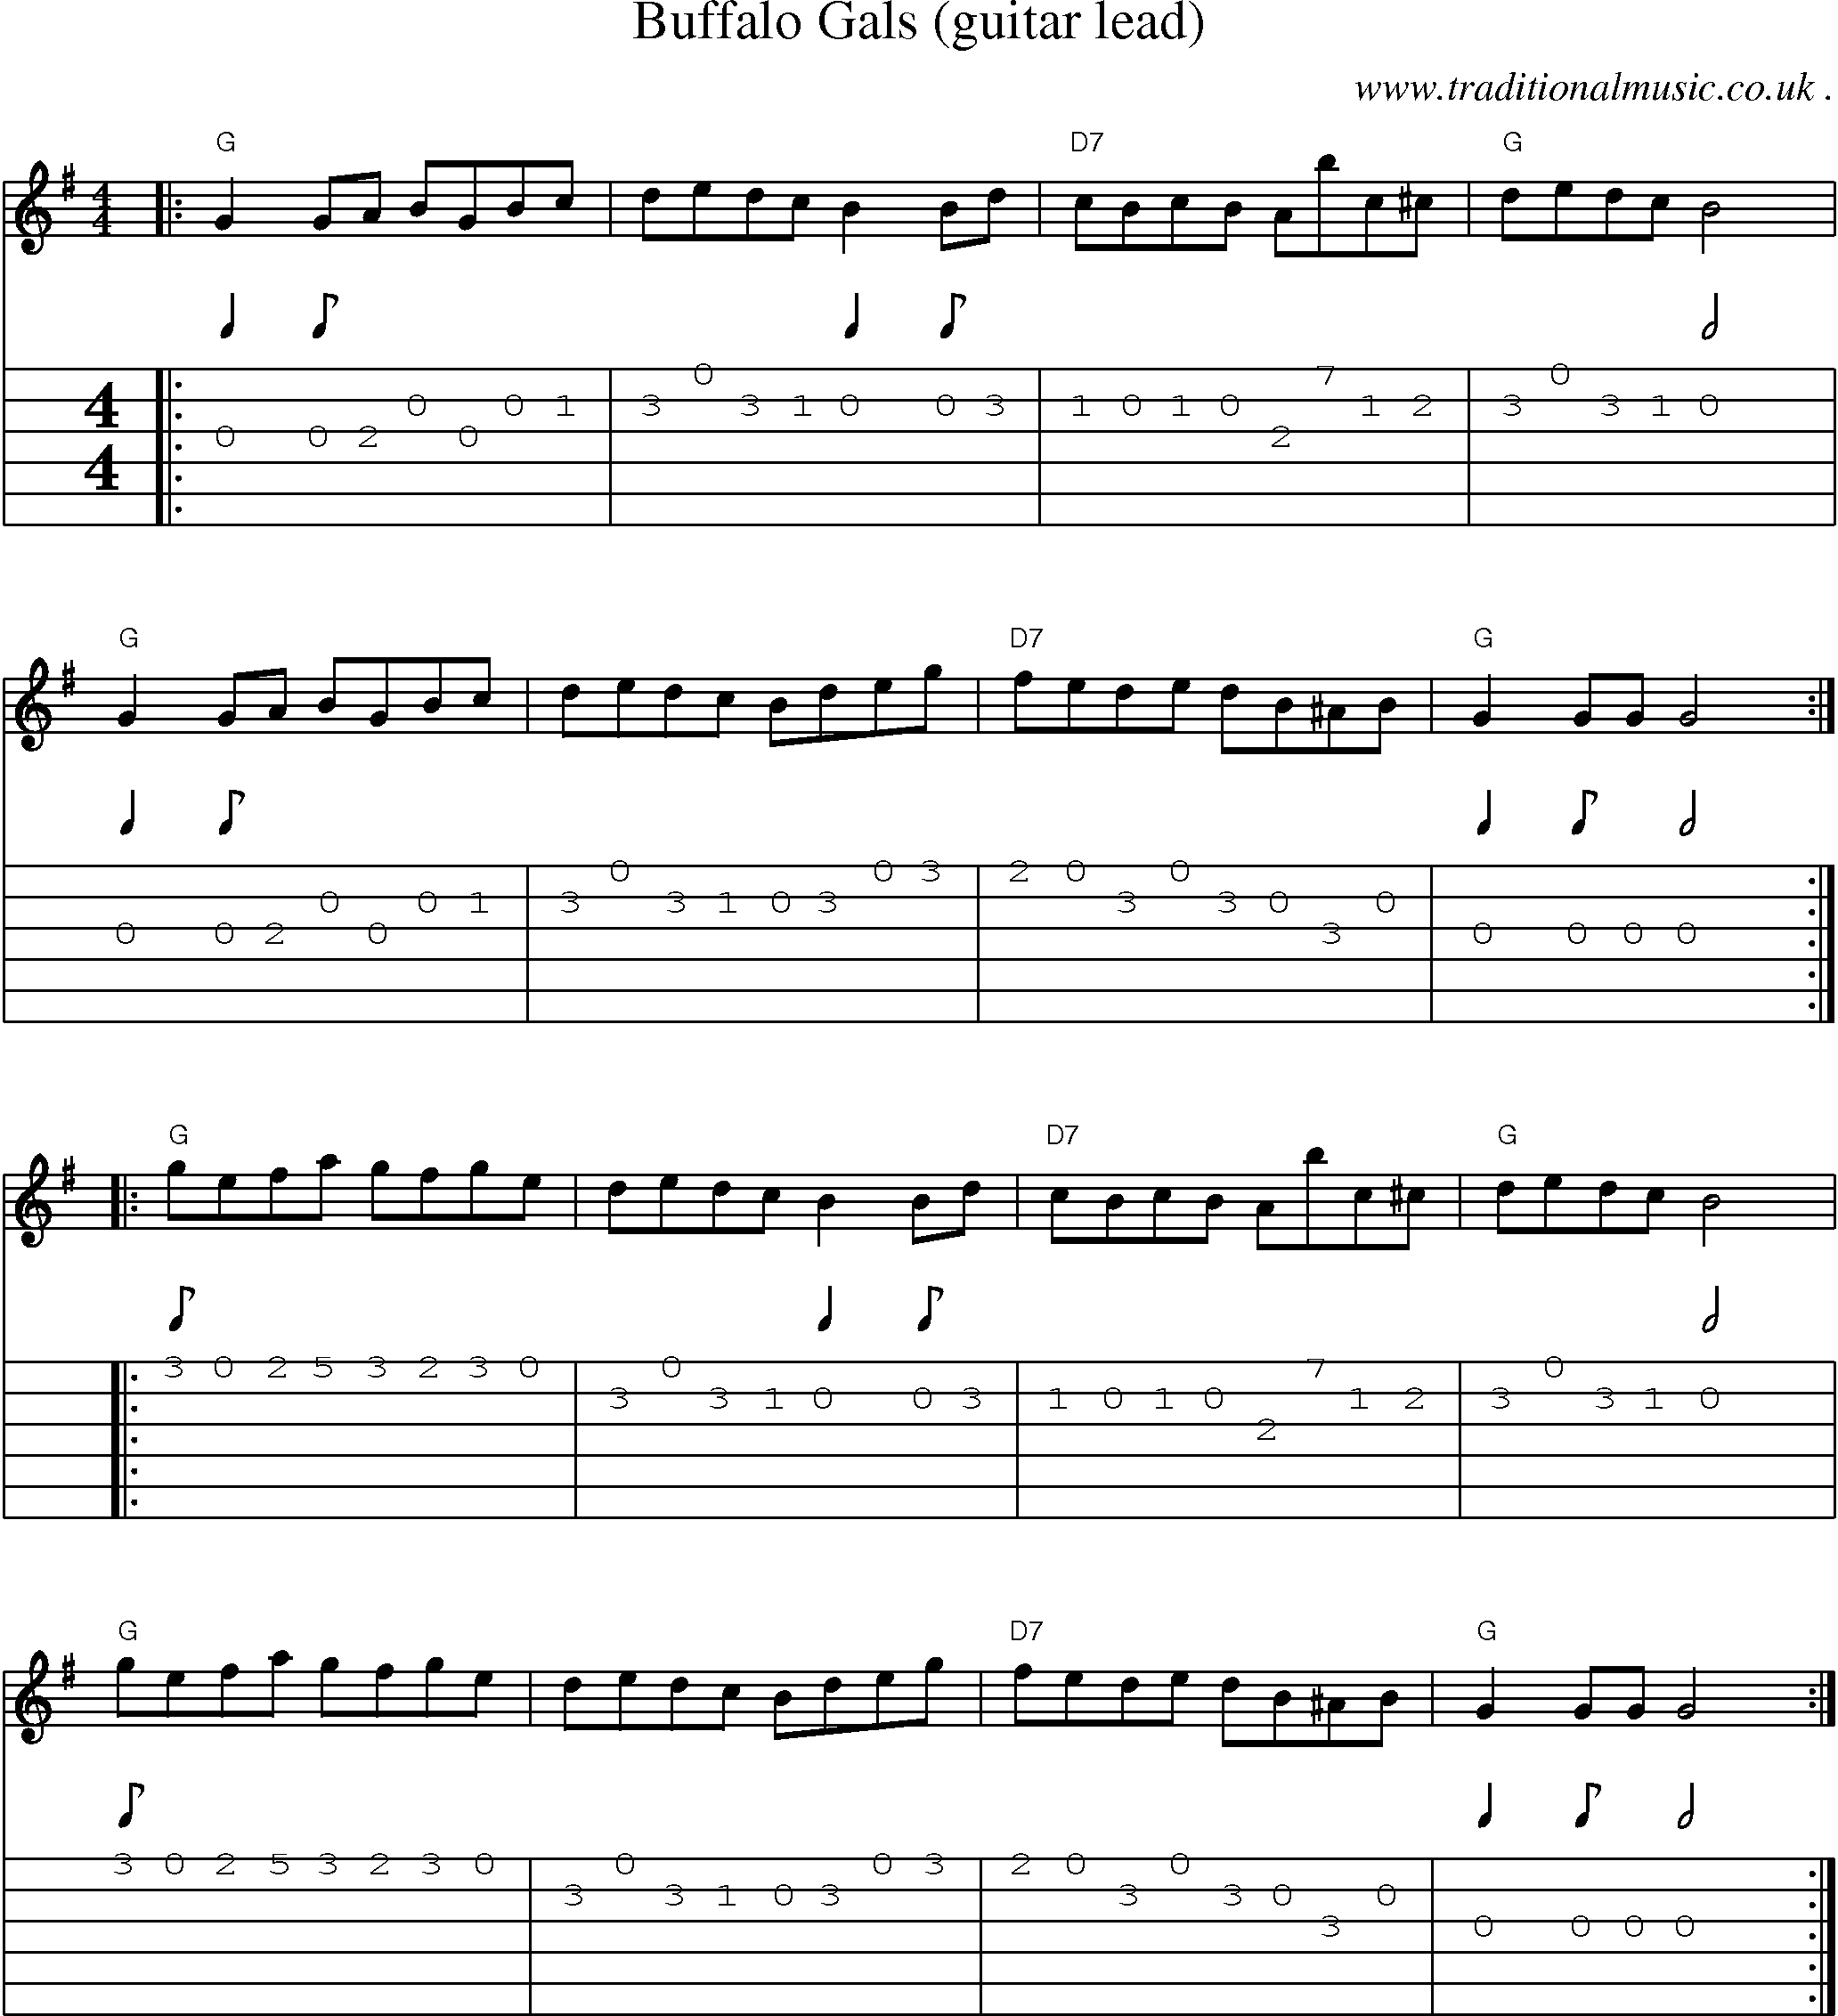 Music Score and Guitar Tabs for Buffalo Gals 2